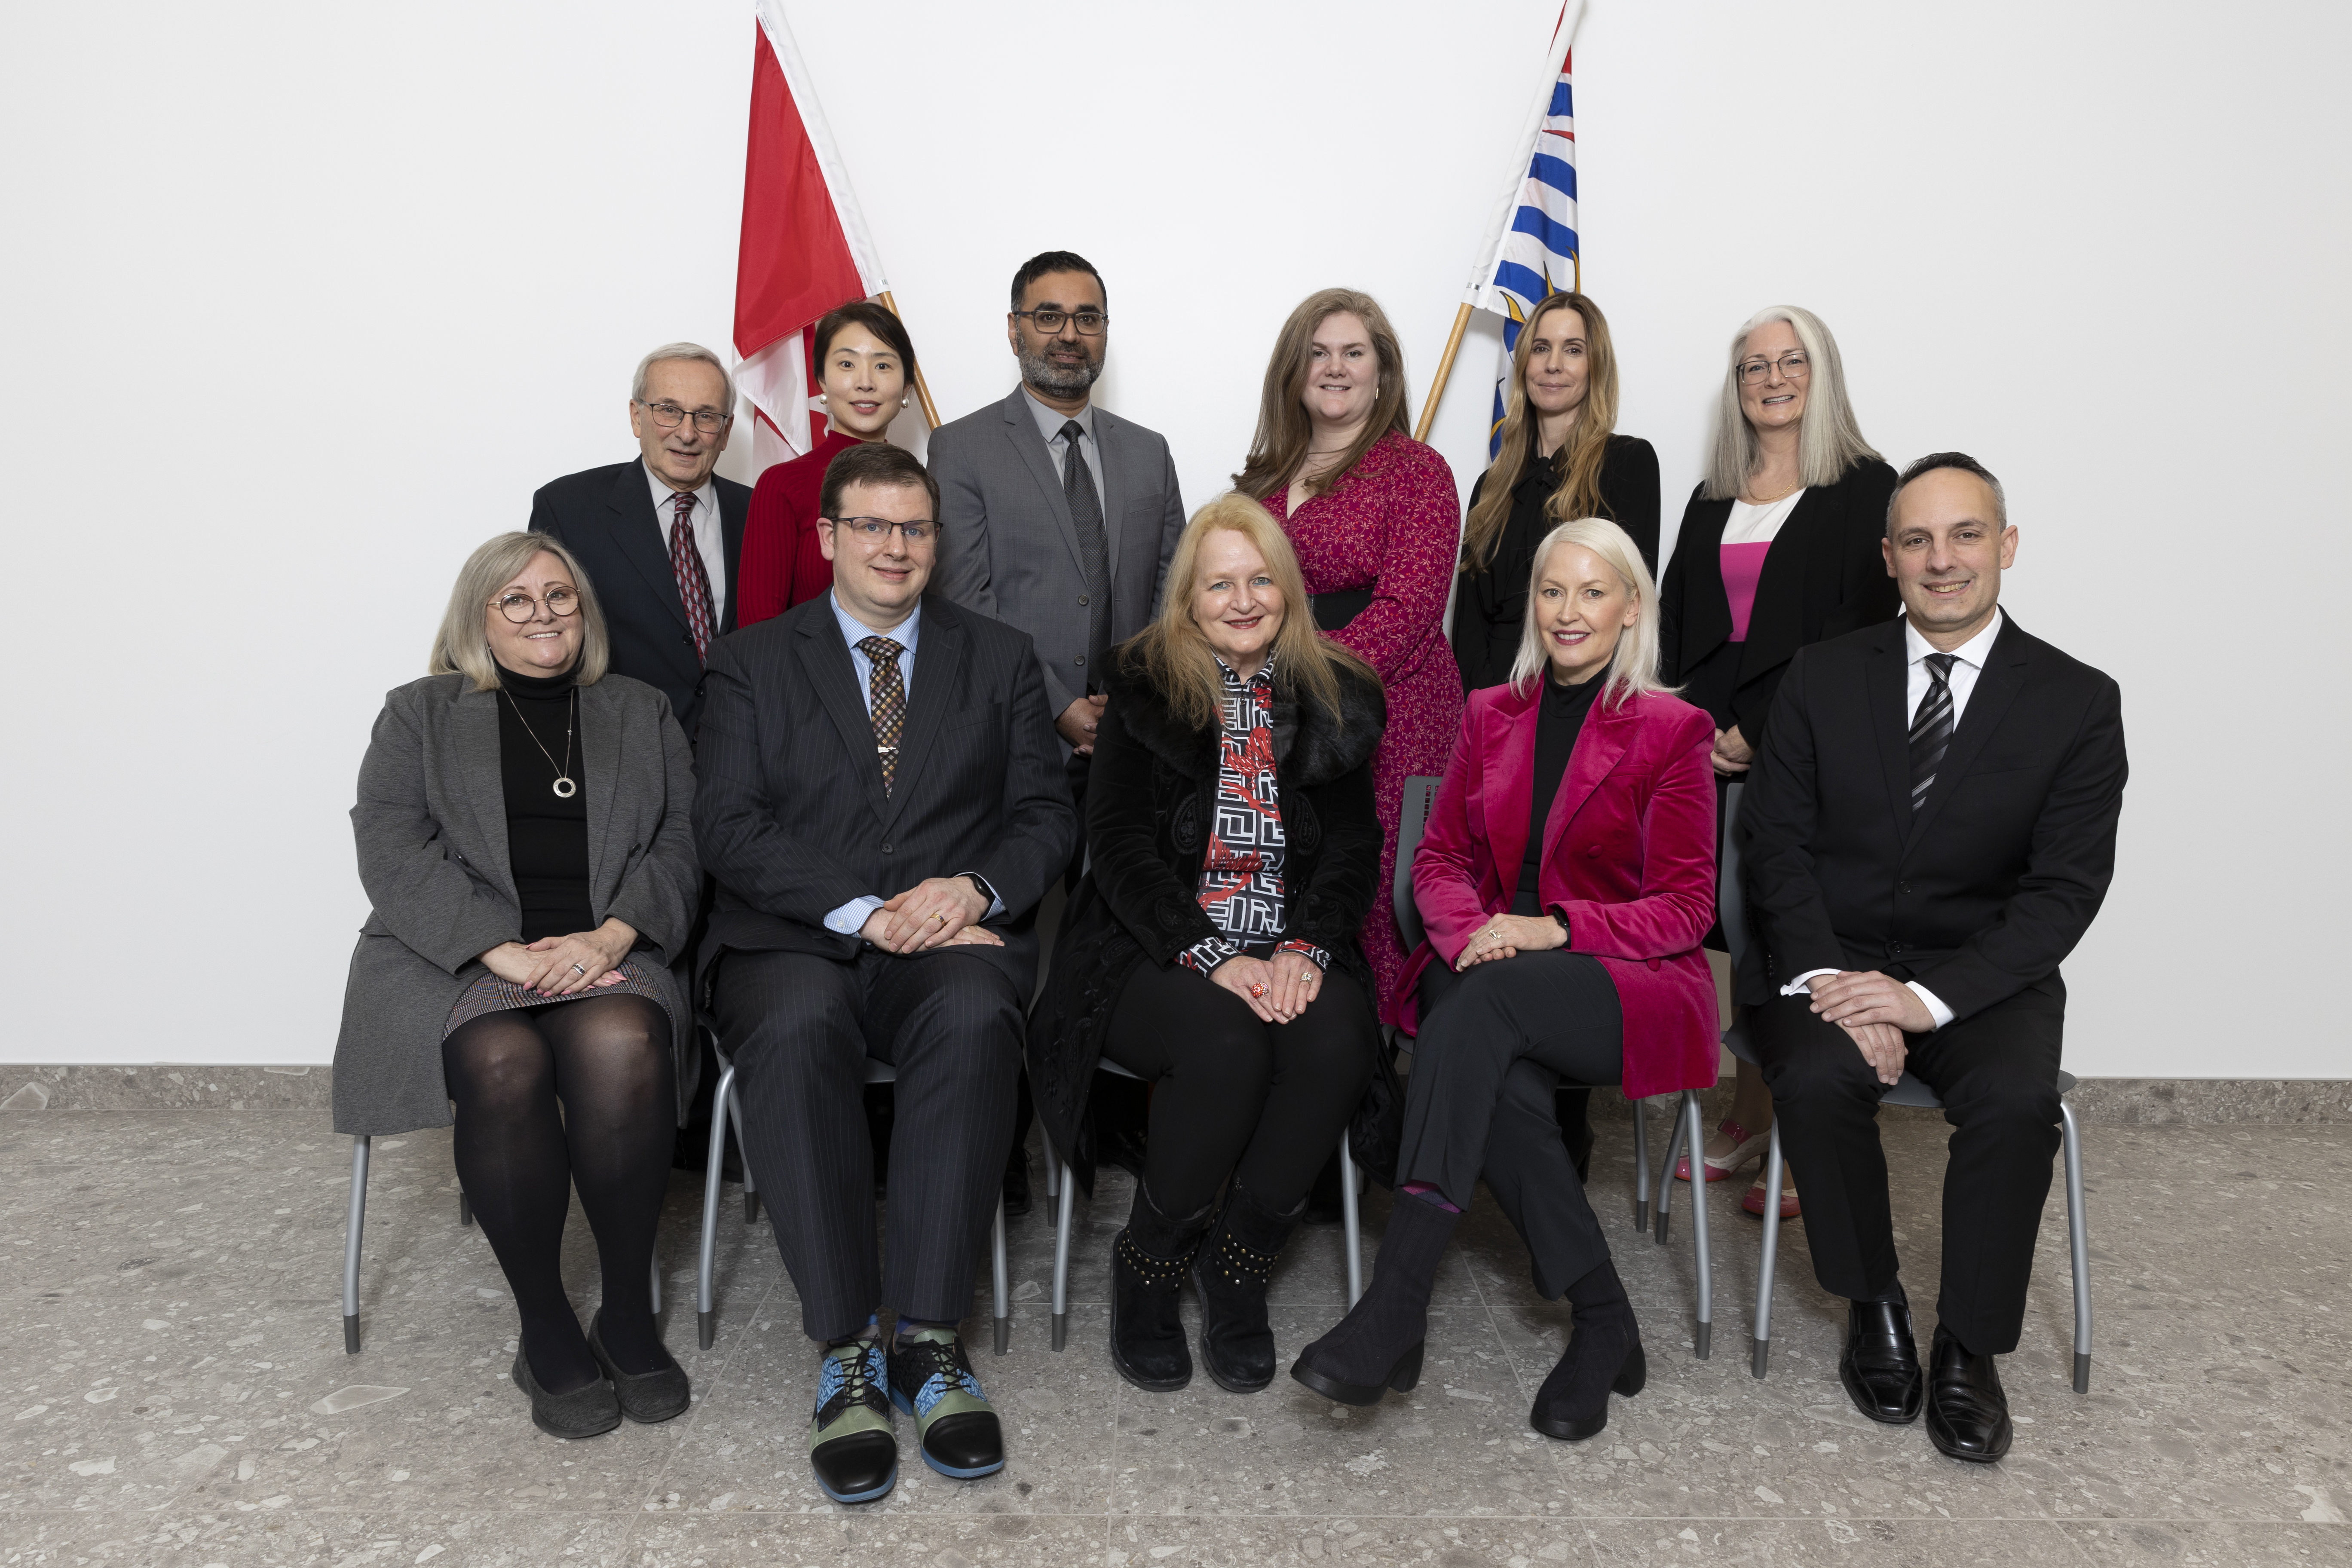 SD43 Board of Education